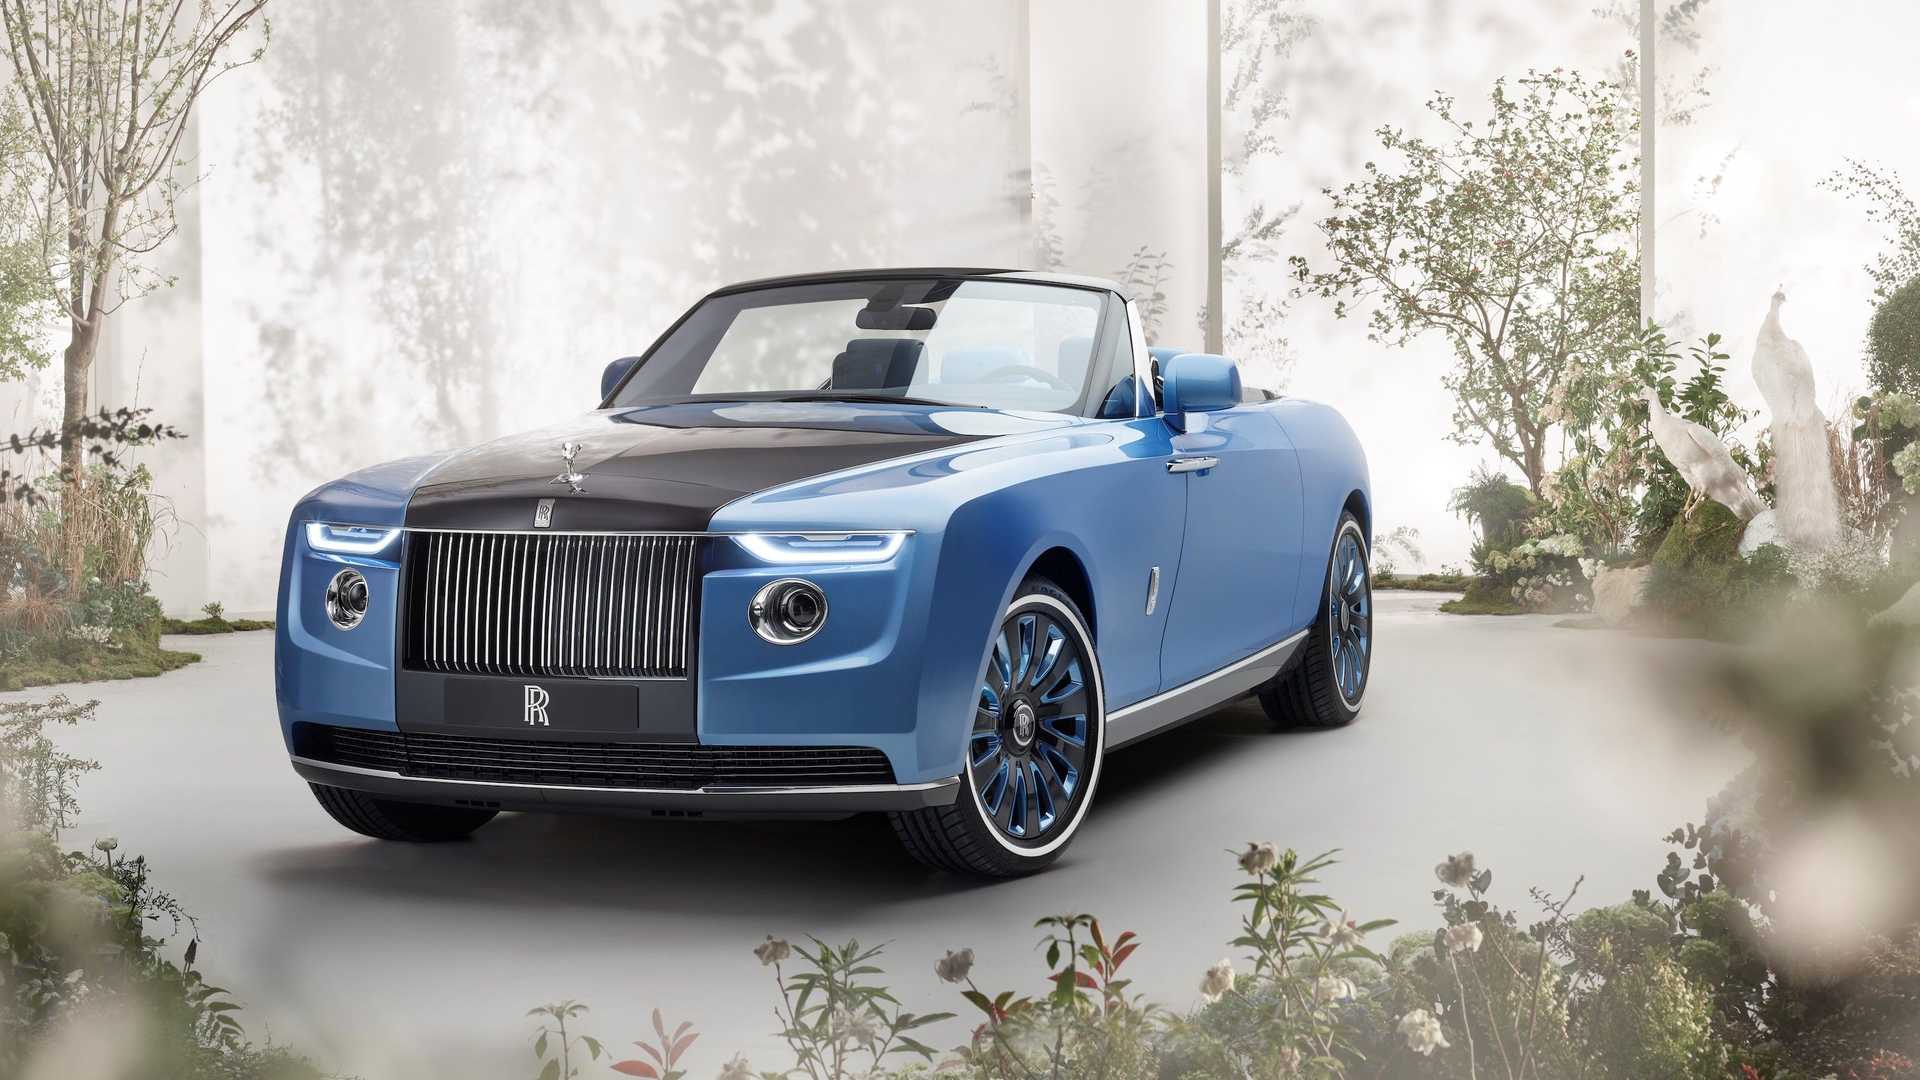 Drive into the future with Rolls Royces landyacht of a concept car   MarketWatch